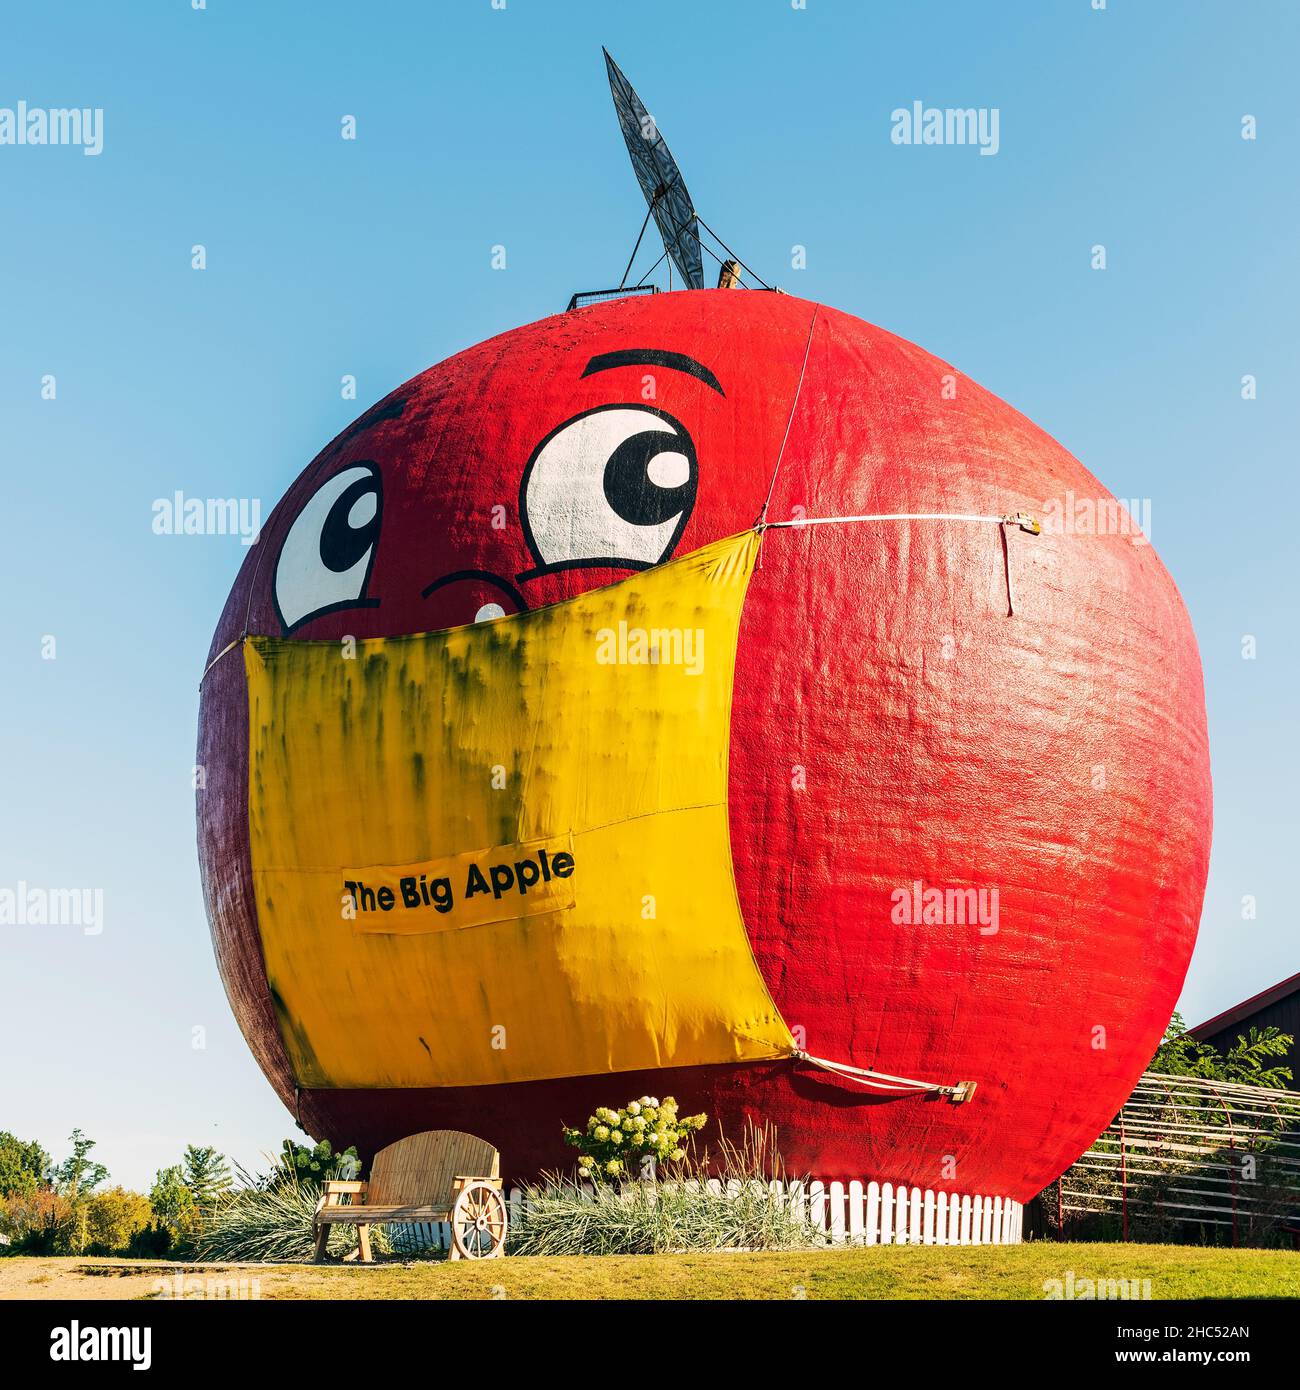 Colborne, Canada - Sept 7, 2021: Big apple the roadside attraction in Colborne, Ontario, located on South side of Ontario Highway 401. Large apple str Stock Photo